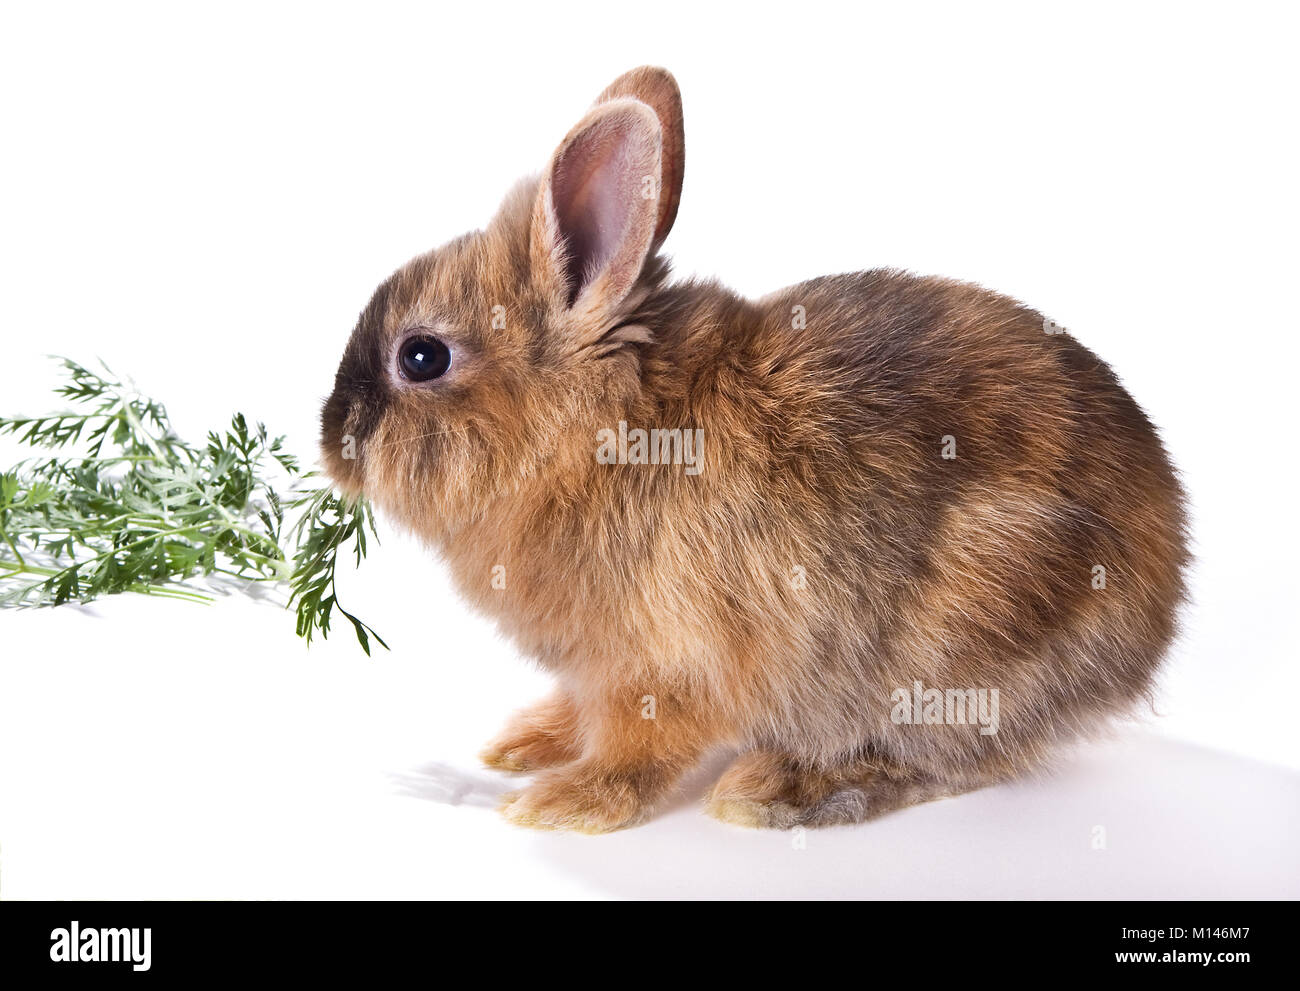 Little brown rabbit eating against a white background Stock Photo